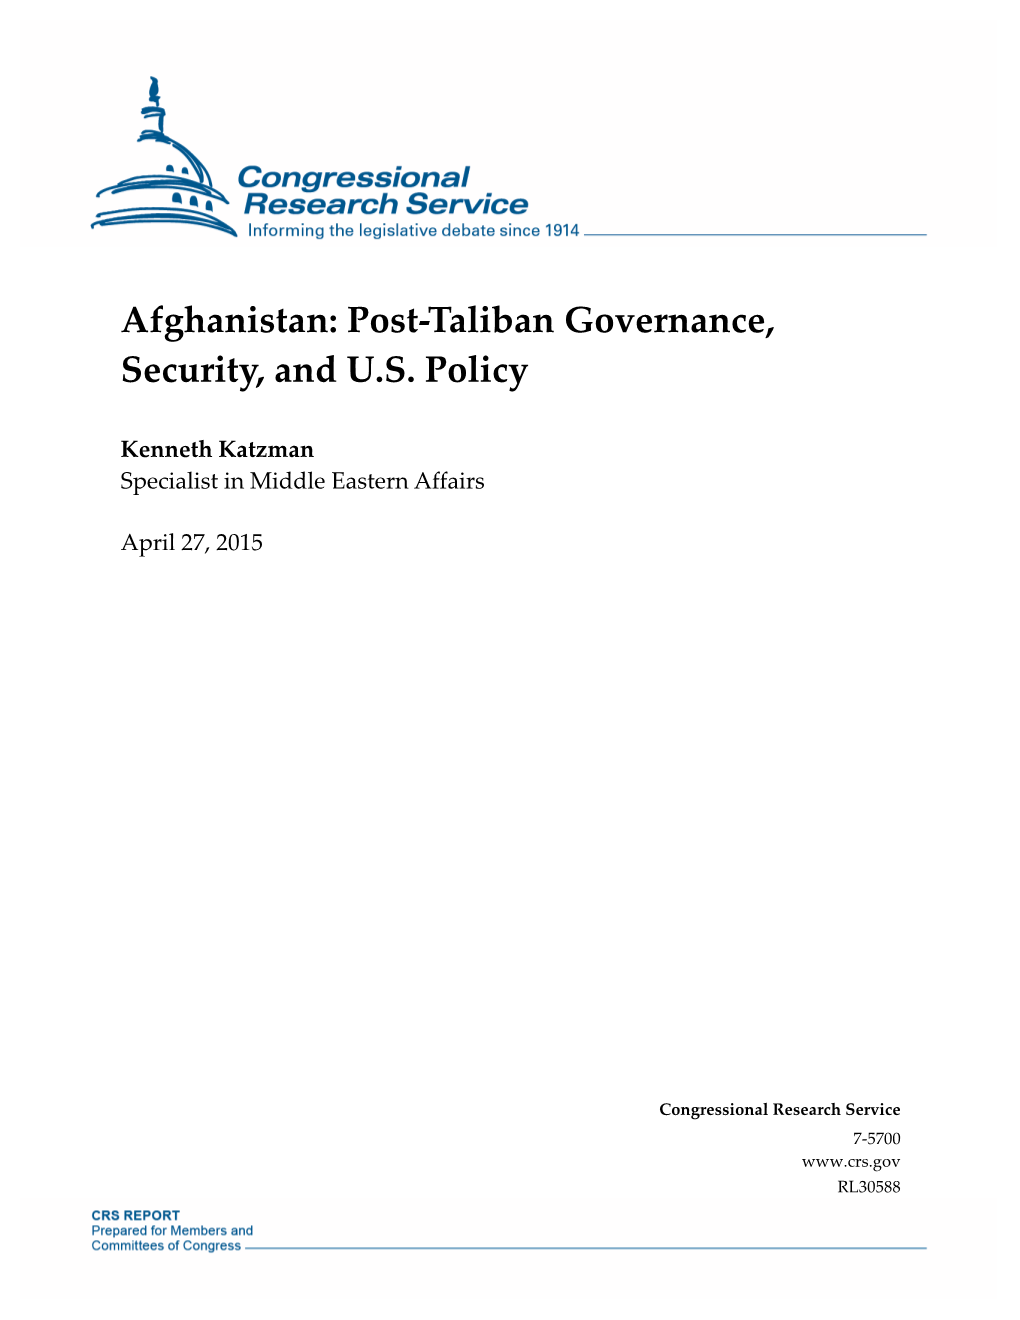 Post-Taliban Governance, Security, and US Policy